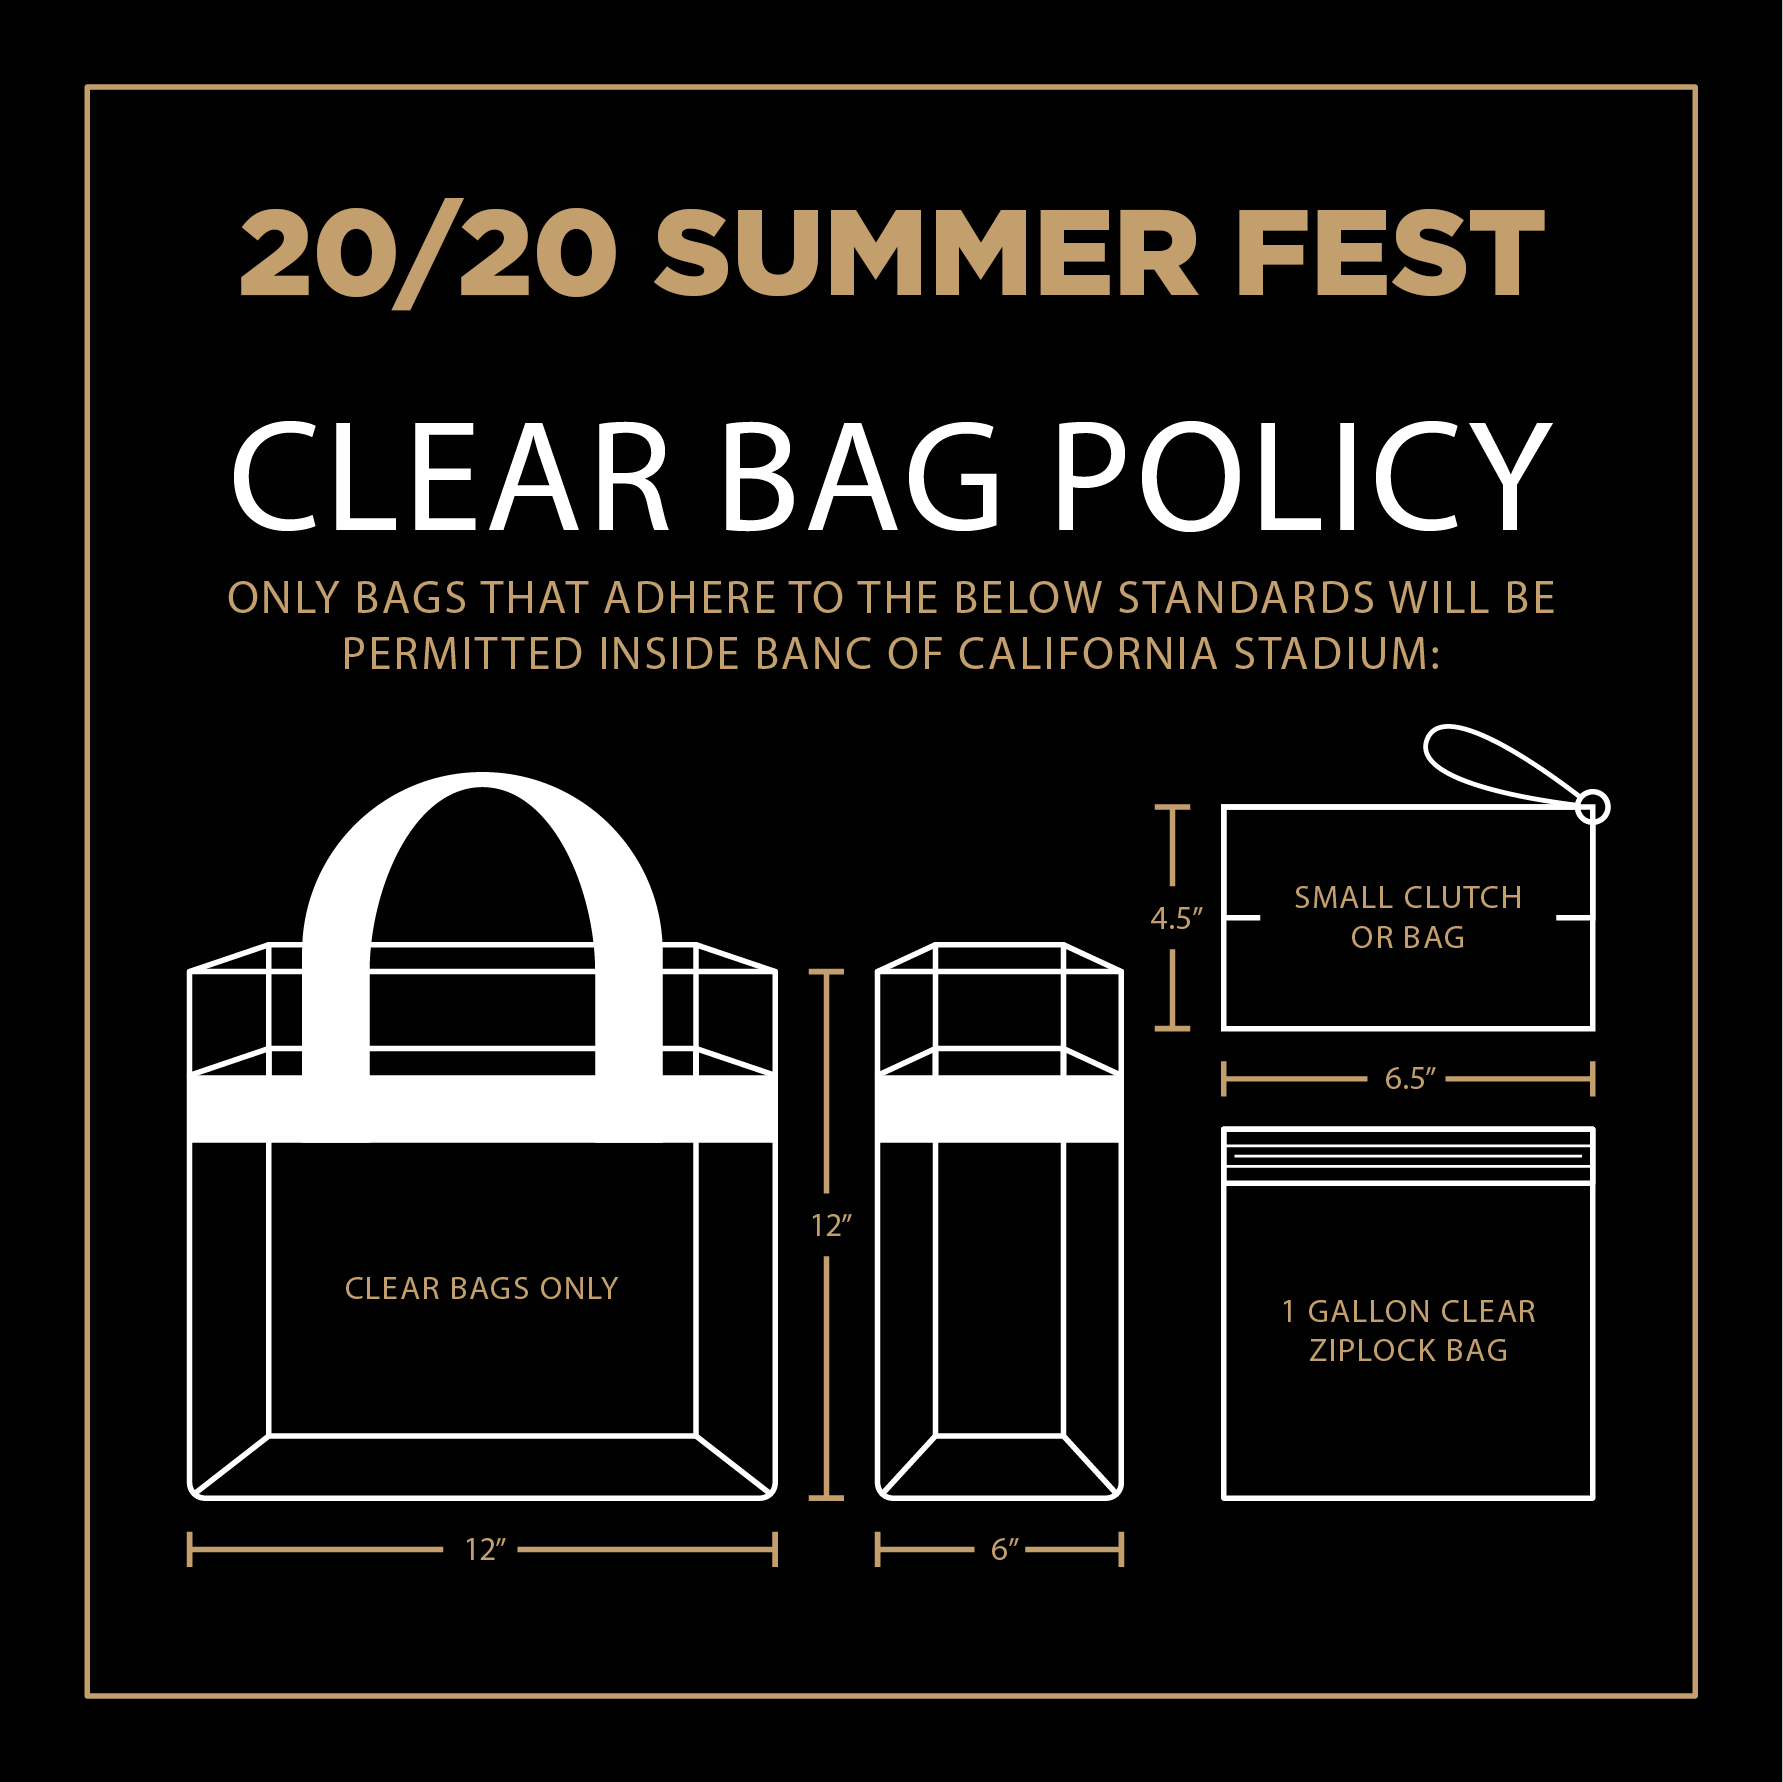 20/20 Summer Fest Clear Bag Policy